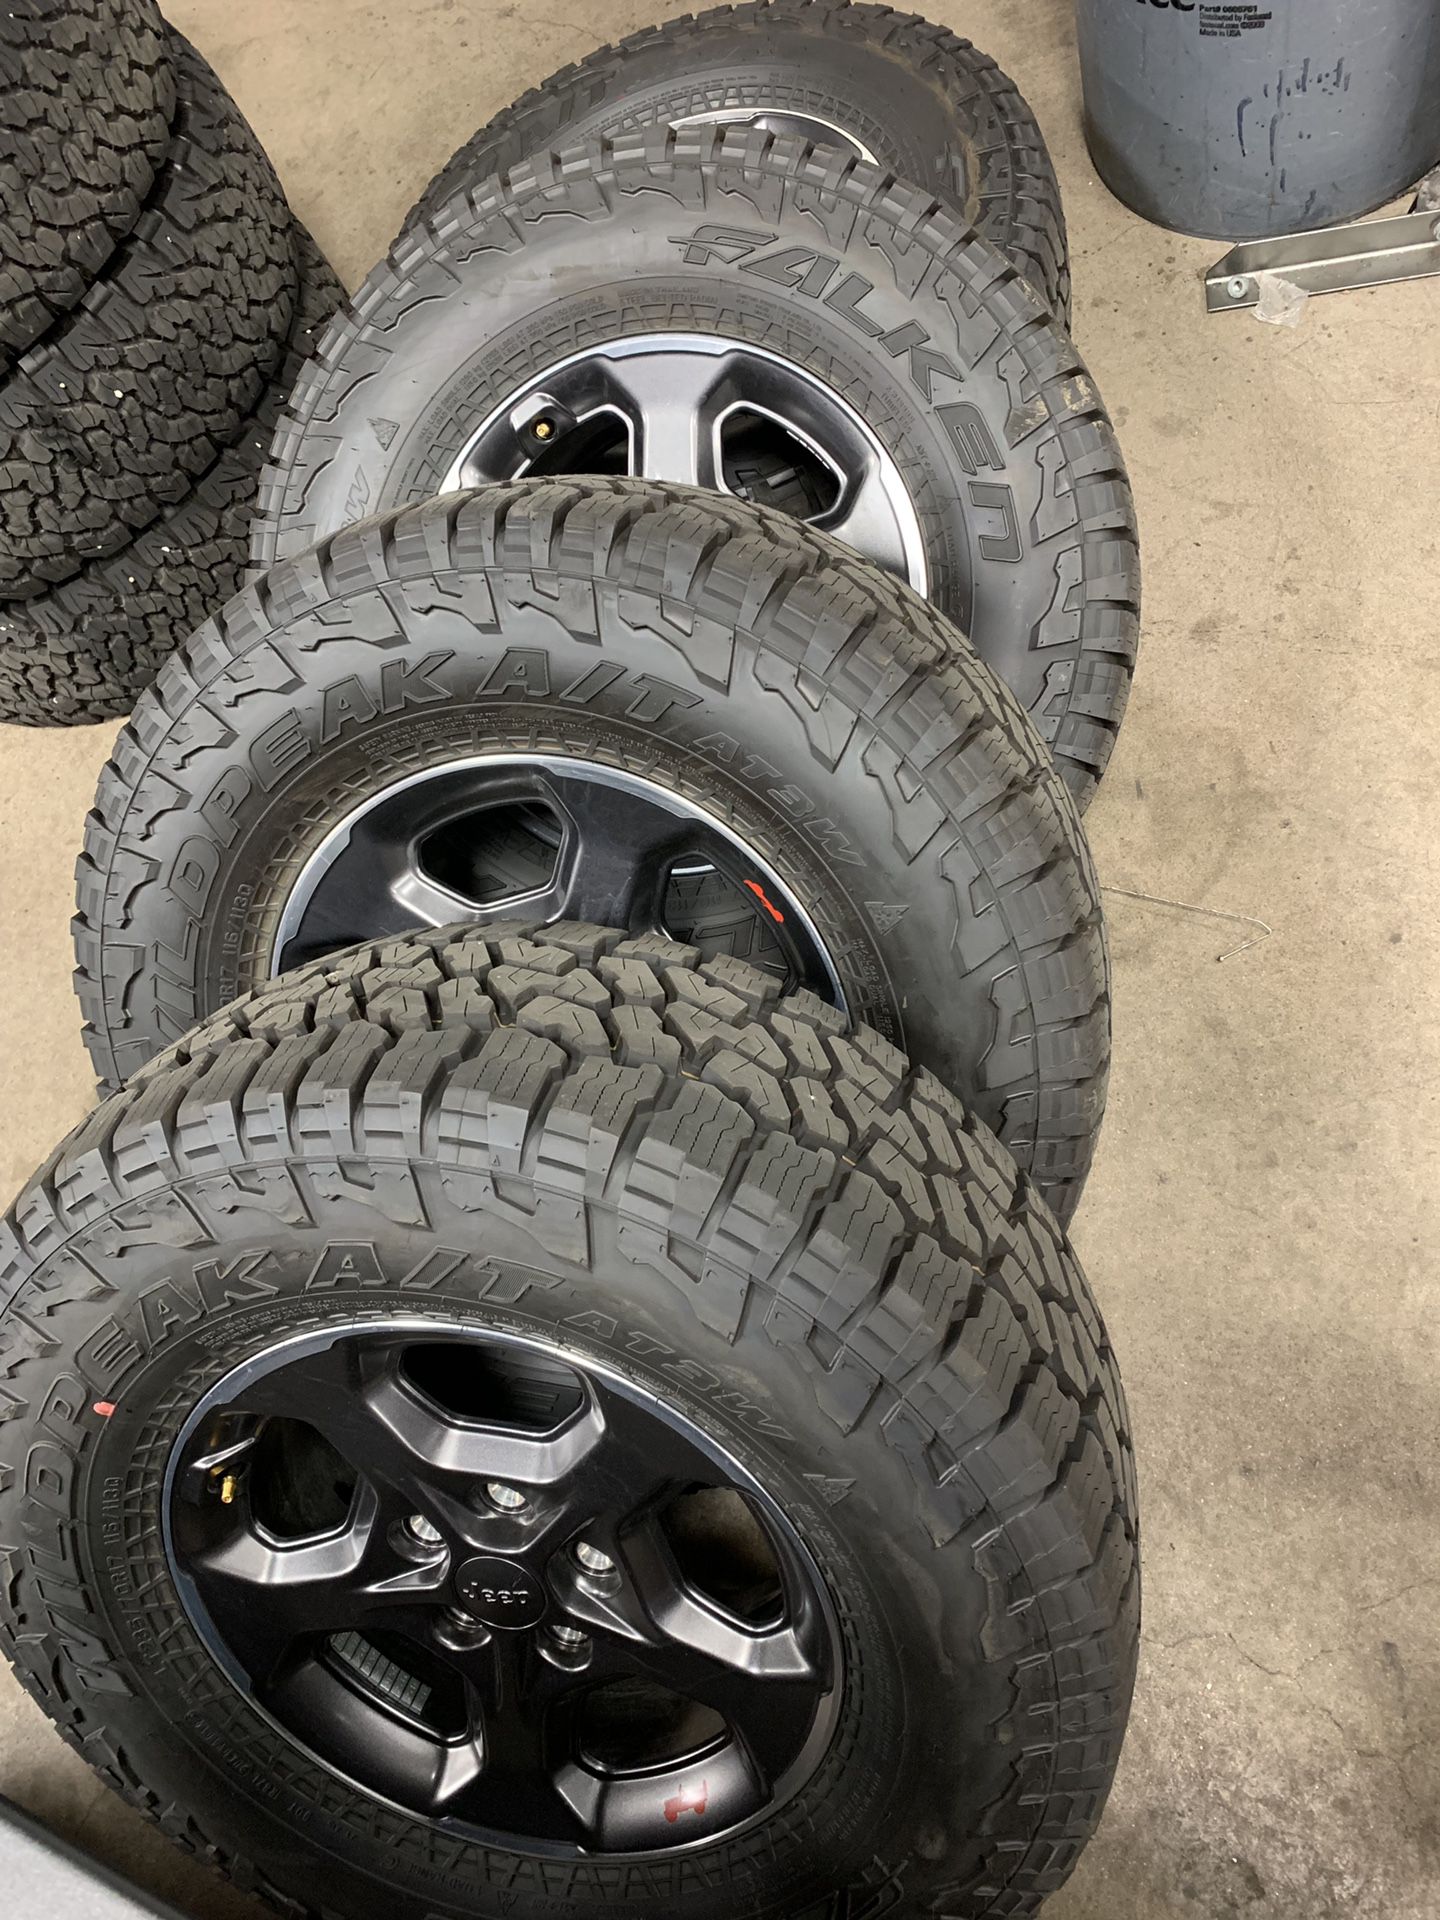 Jeep Gladiator Rubicon Tires and Rims